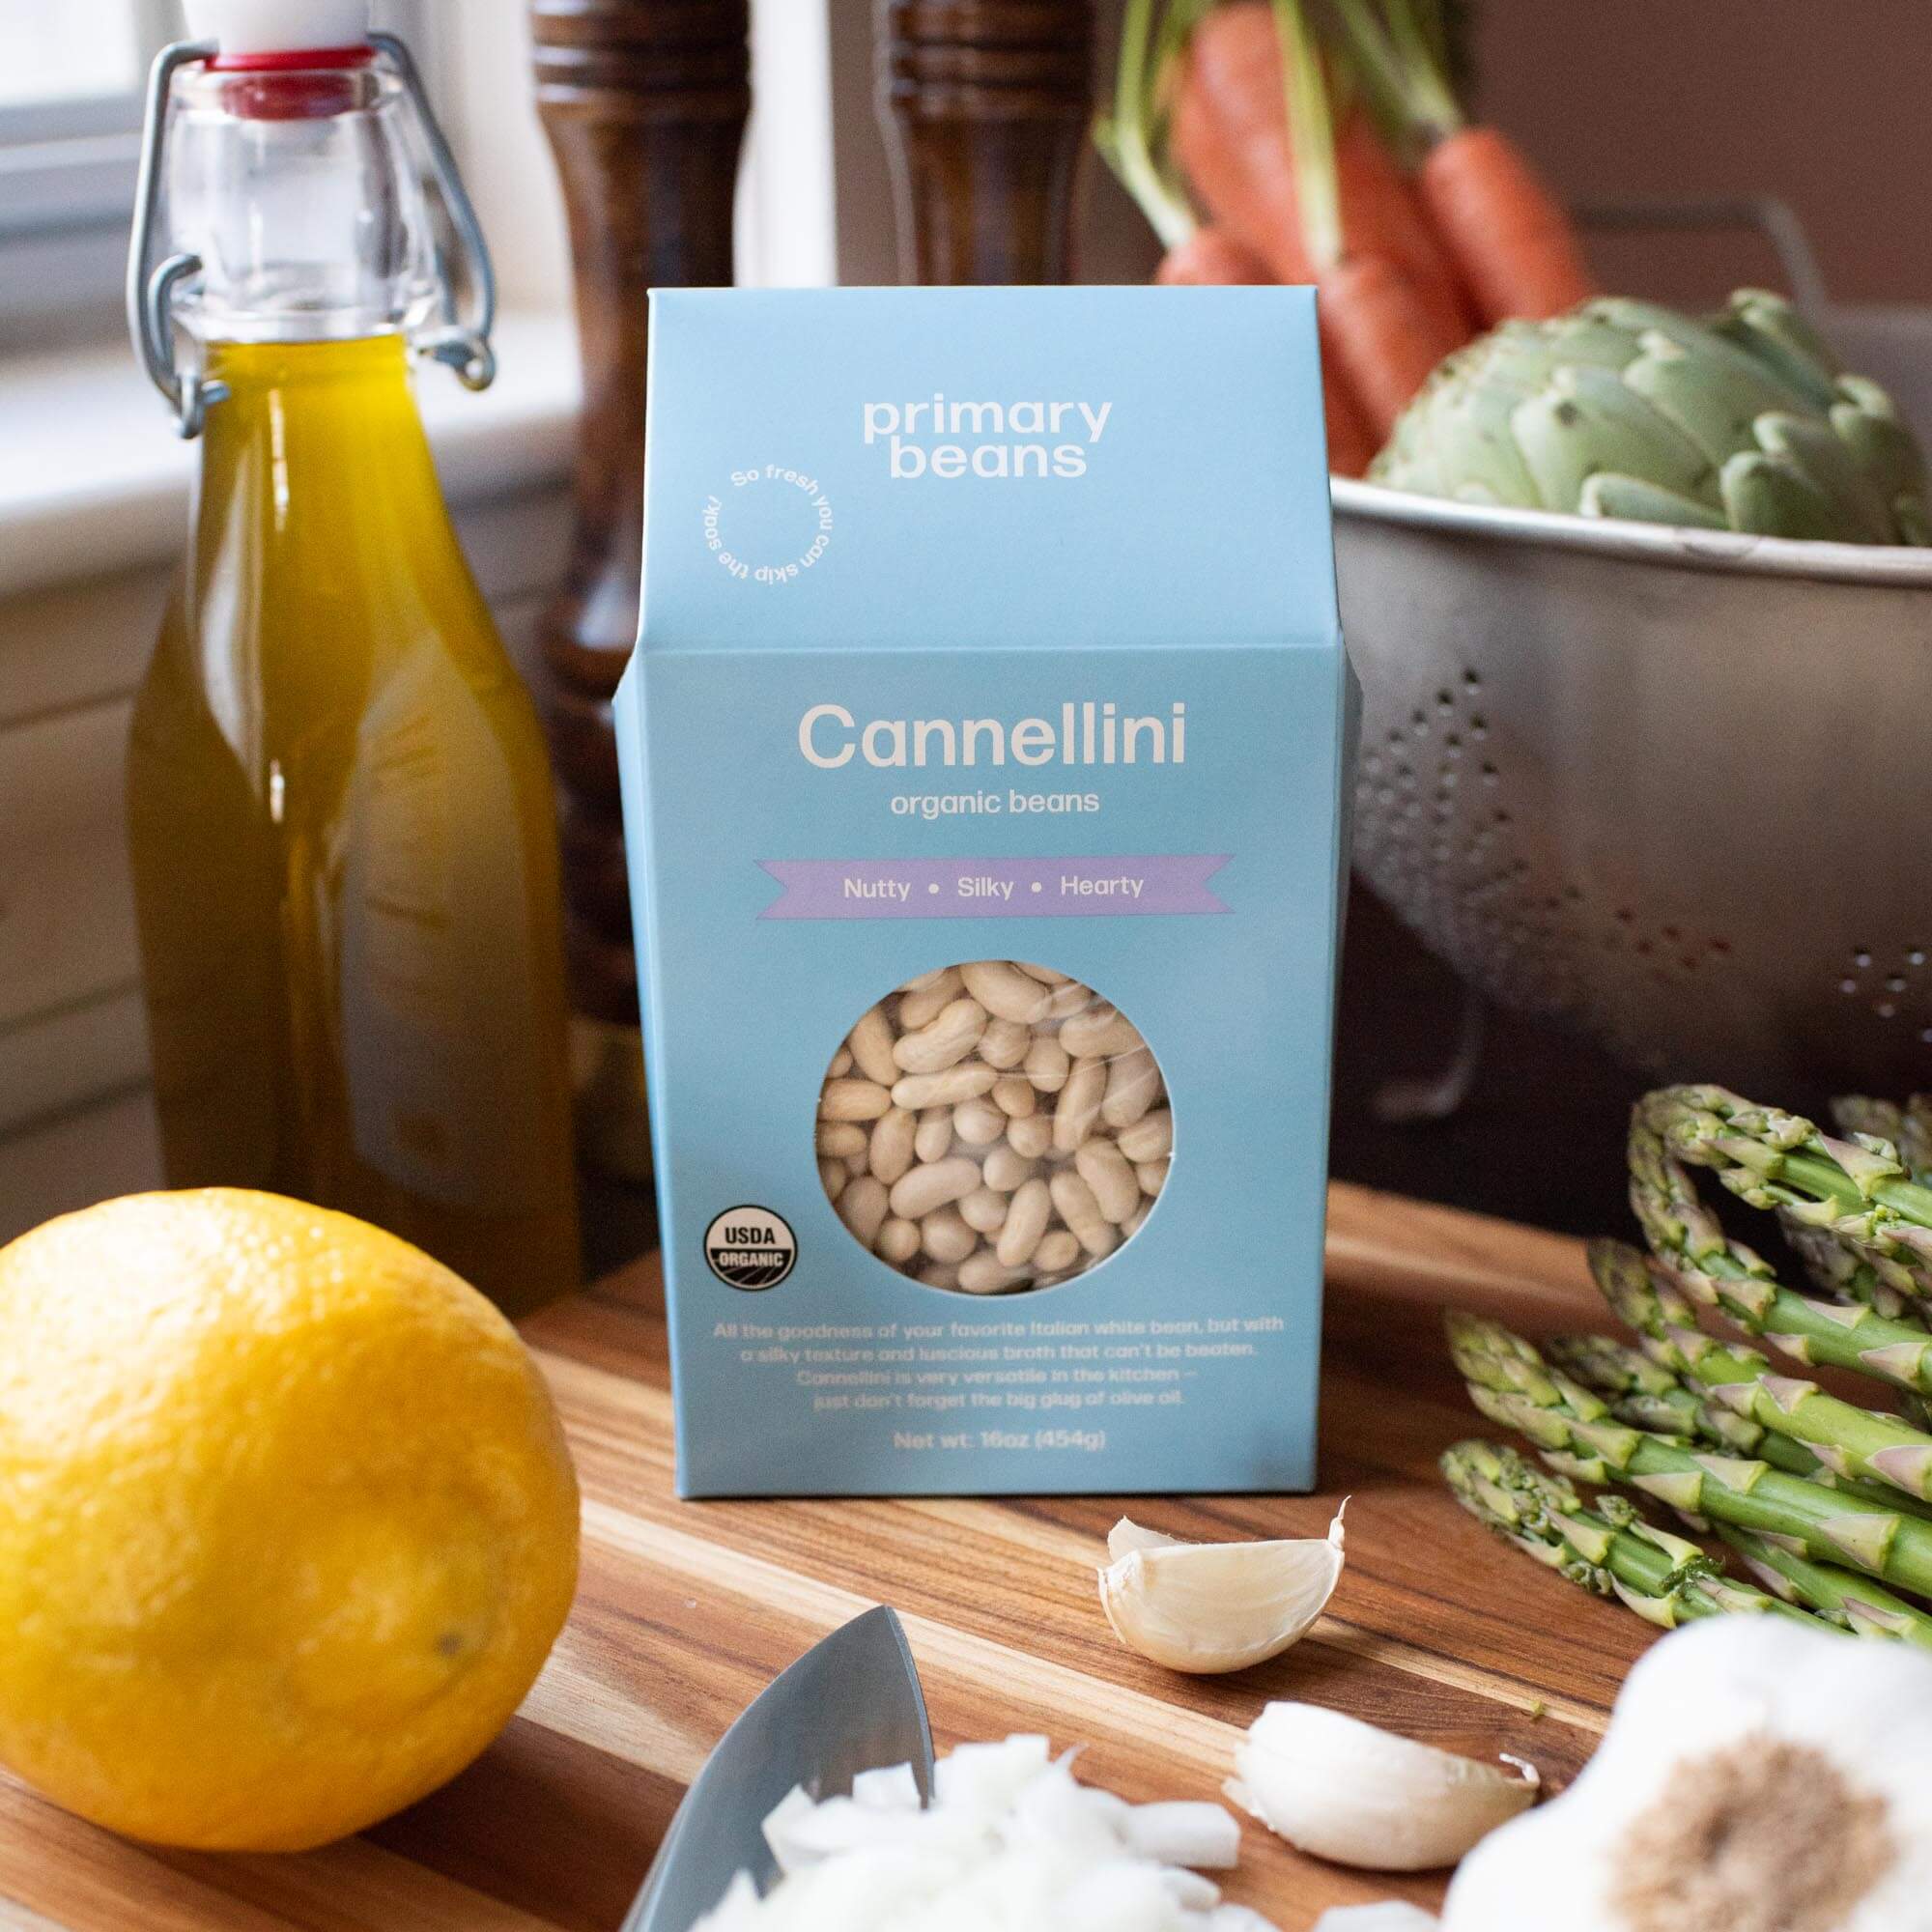 Primary Beans Organic Cannellini counter